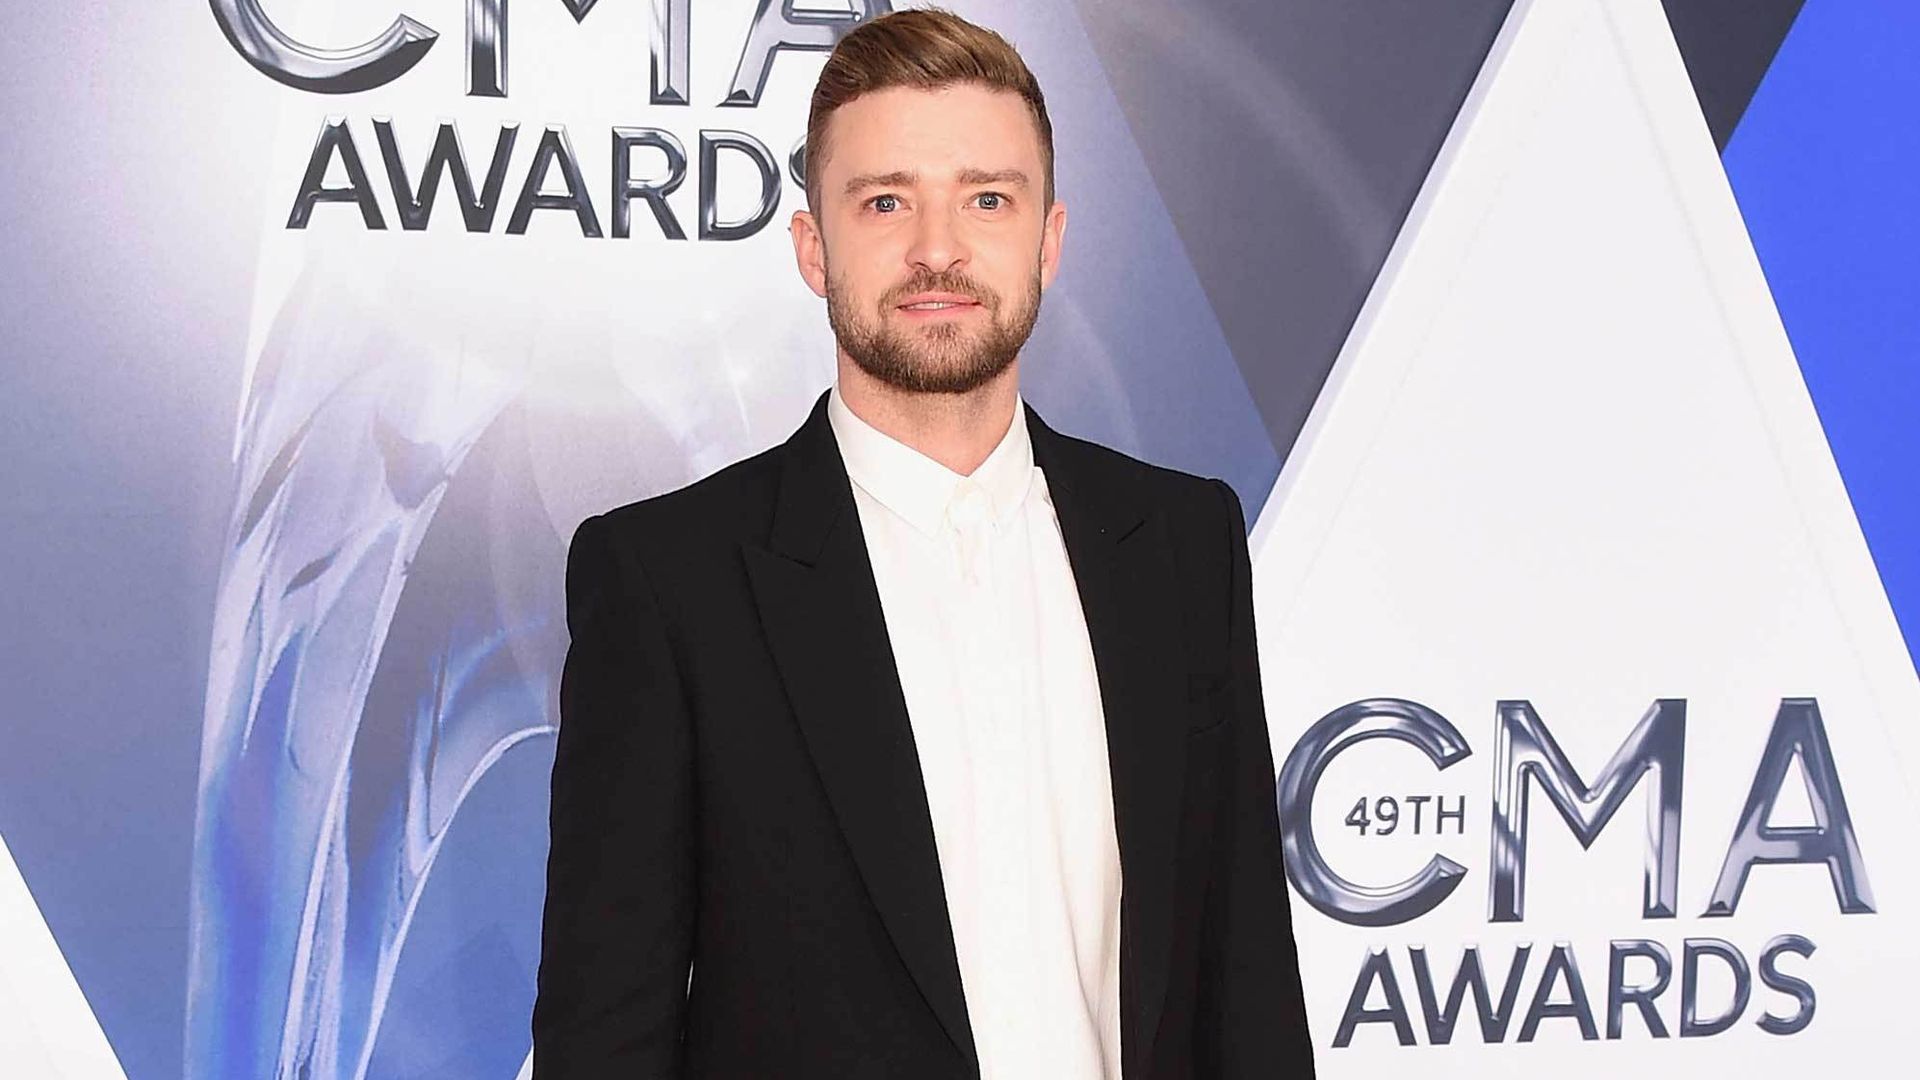 Justin Timberlake returns to the studio with Little Big Town